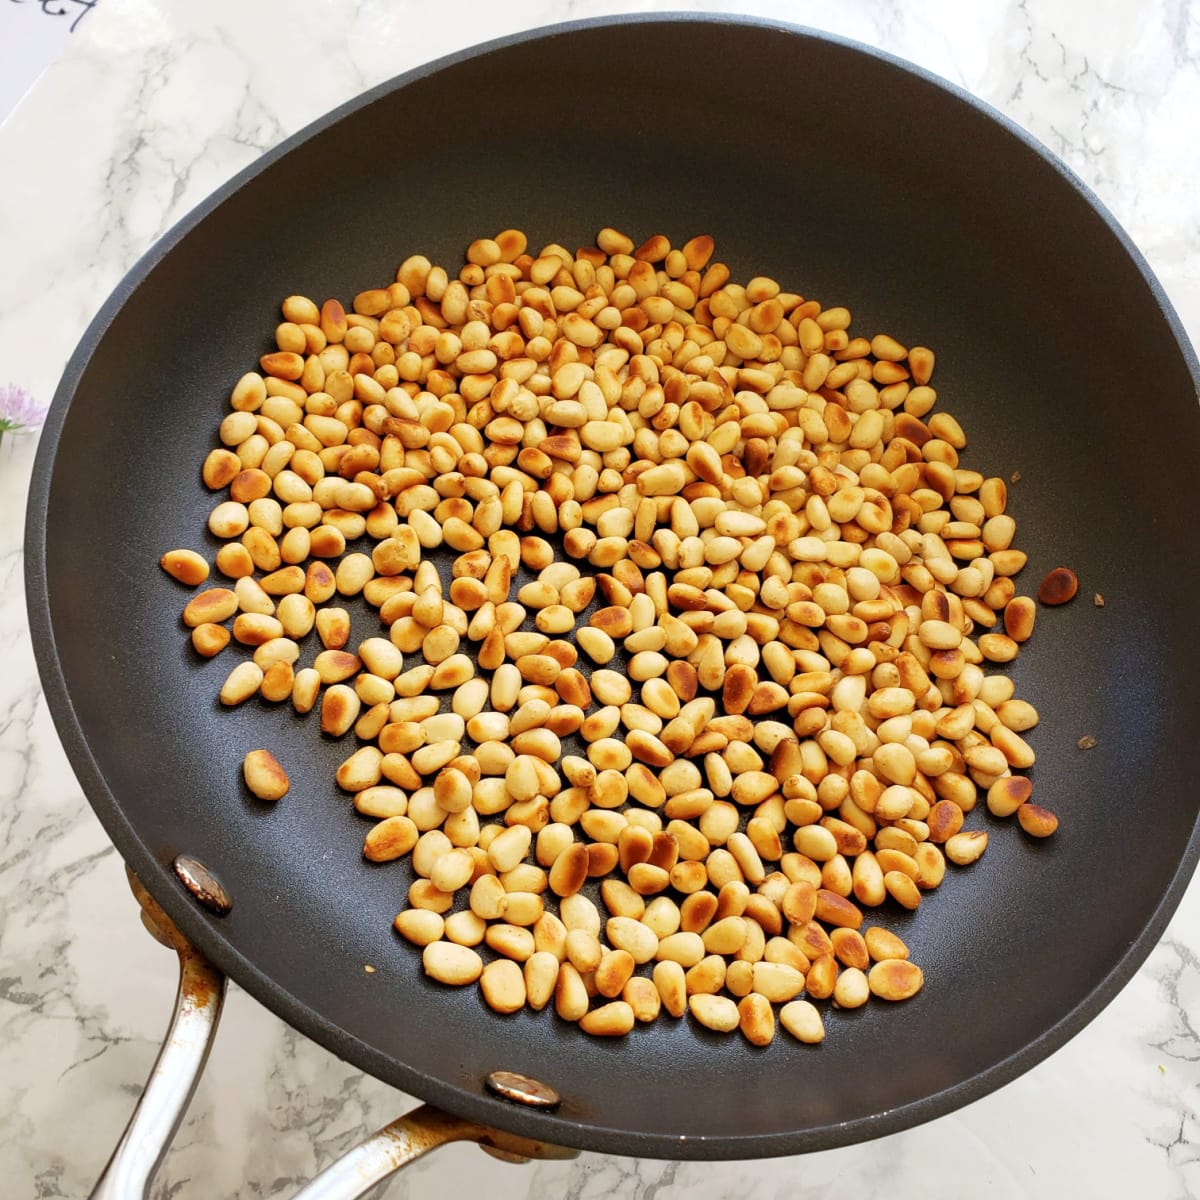 Toasted pine nuts in a grey skillet